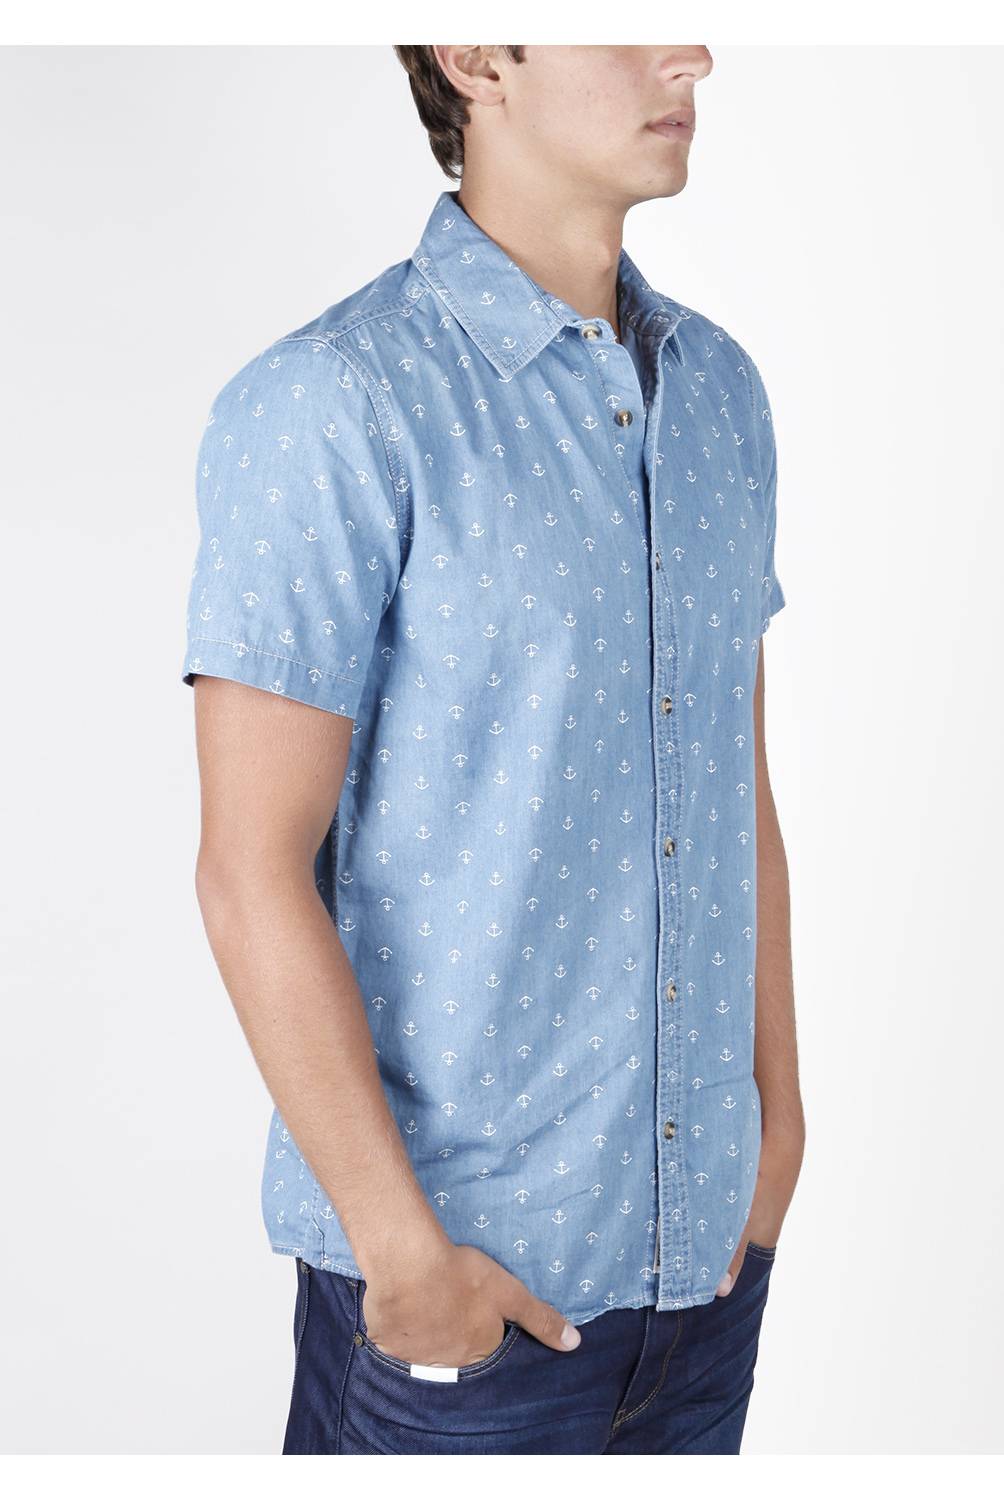 SECOND IMAGE - Camisa Hombre Ancla